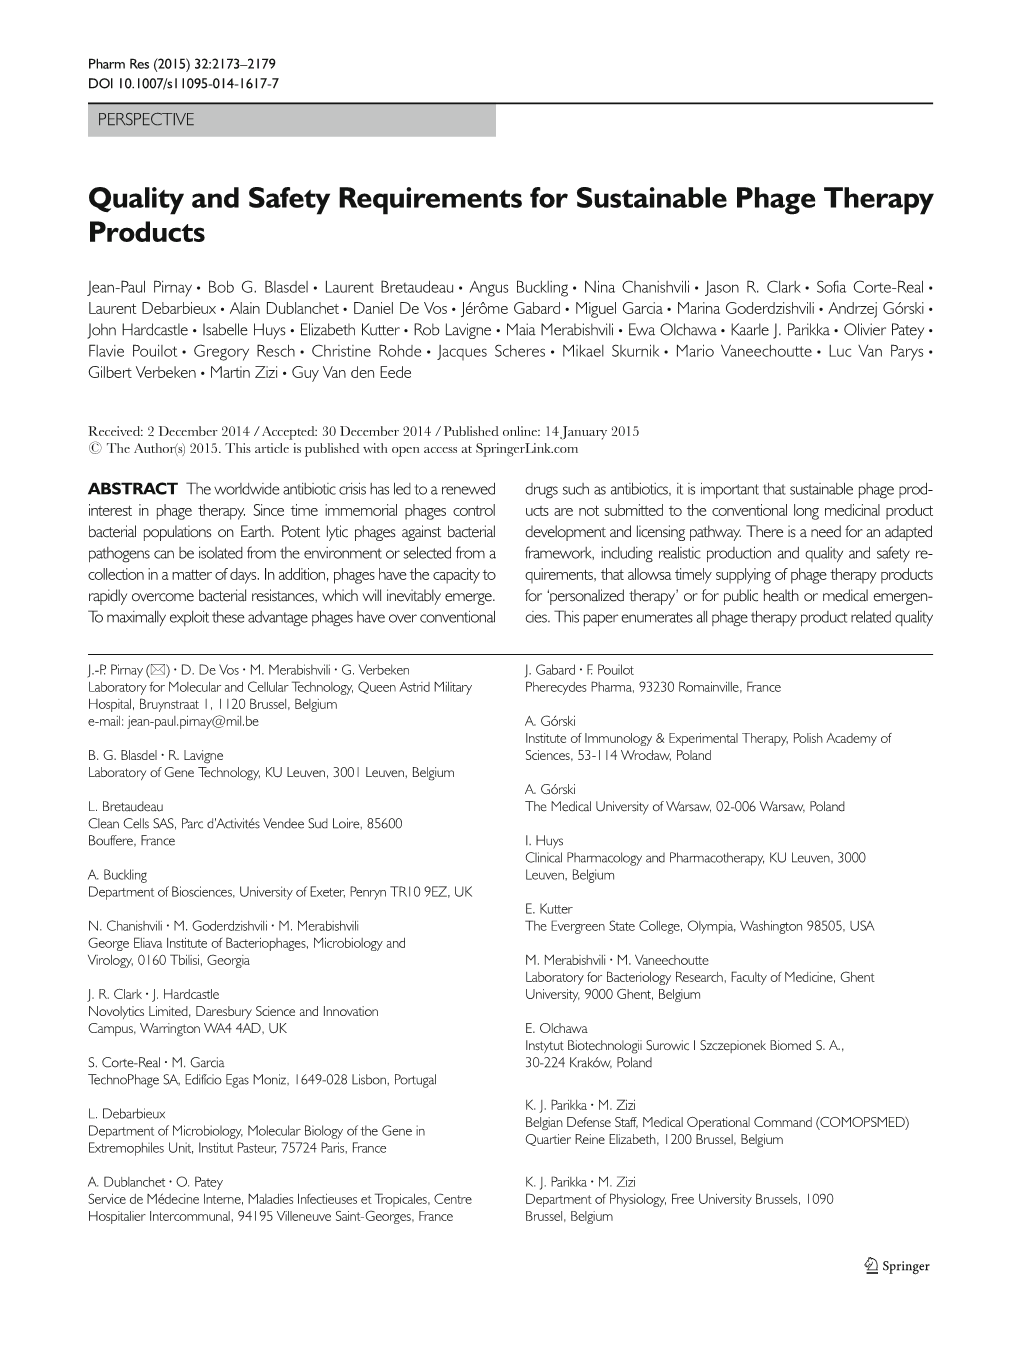 Quality and Safety Requirements for Sustainable Phage Therapy Products